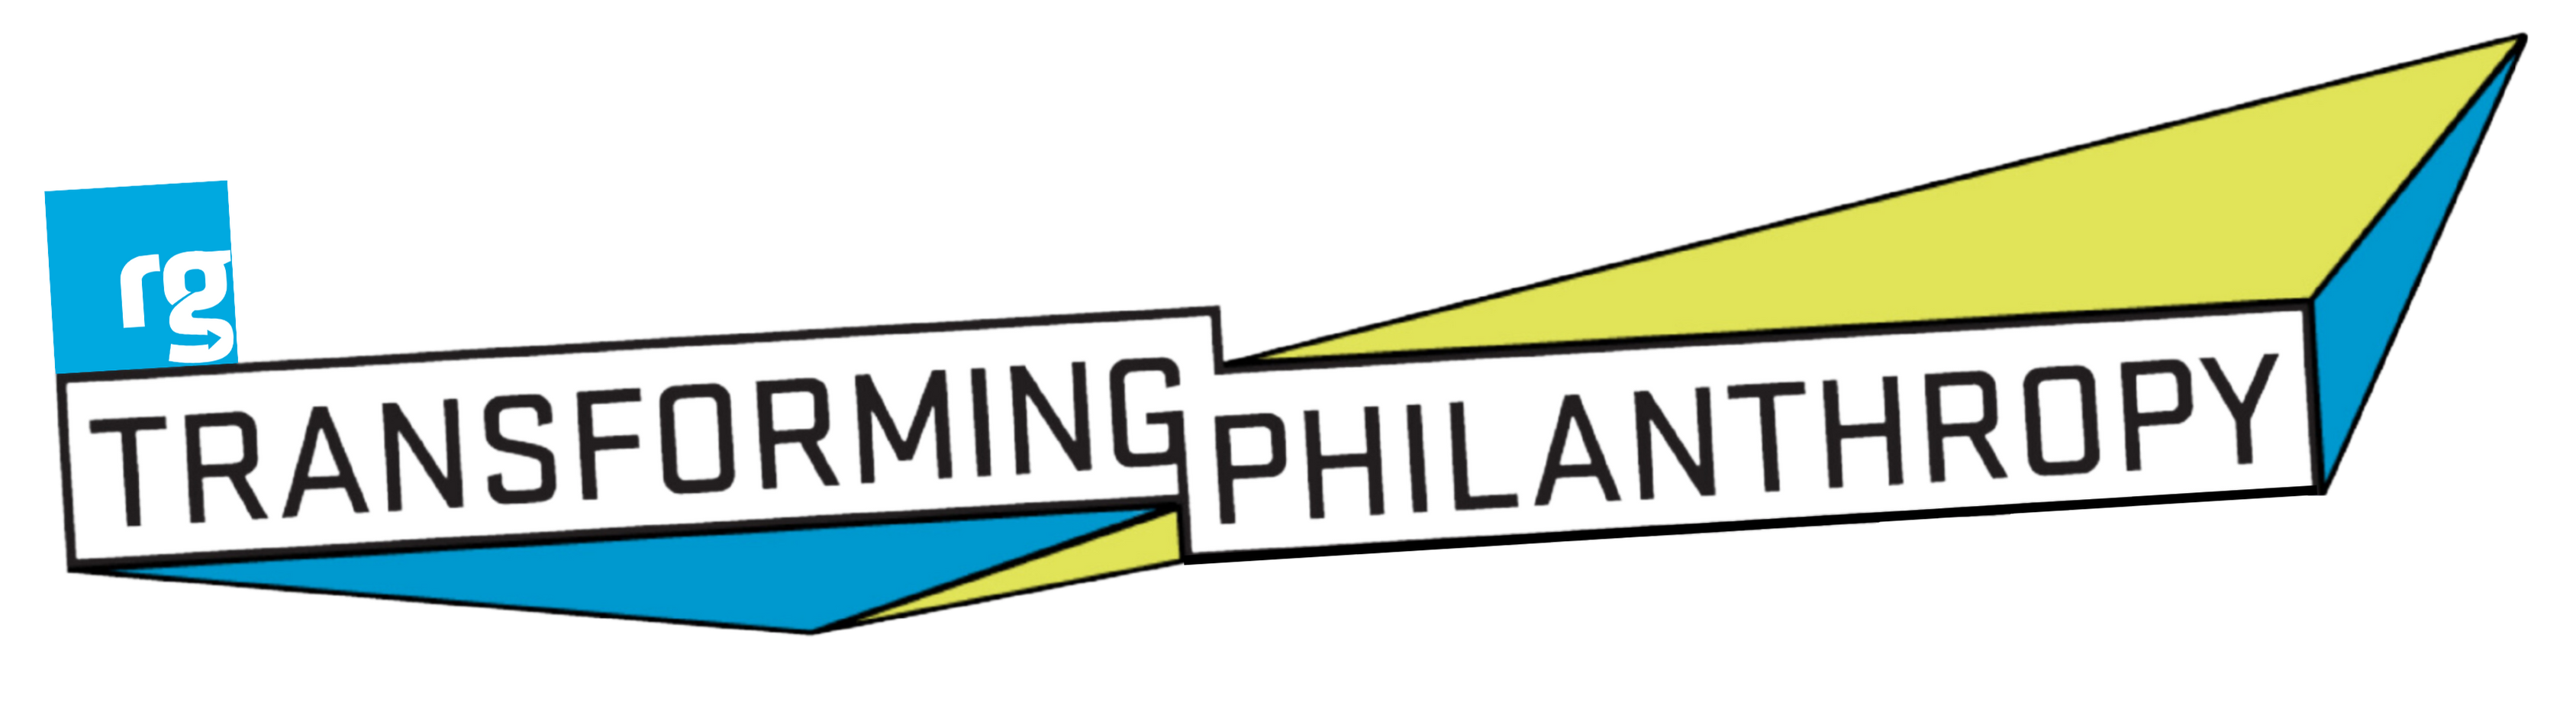 Transforming Philanthropy Logo in white boxes with black text. 